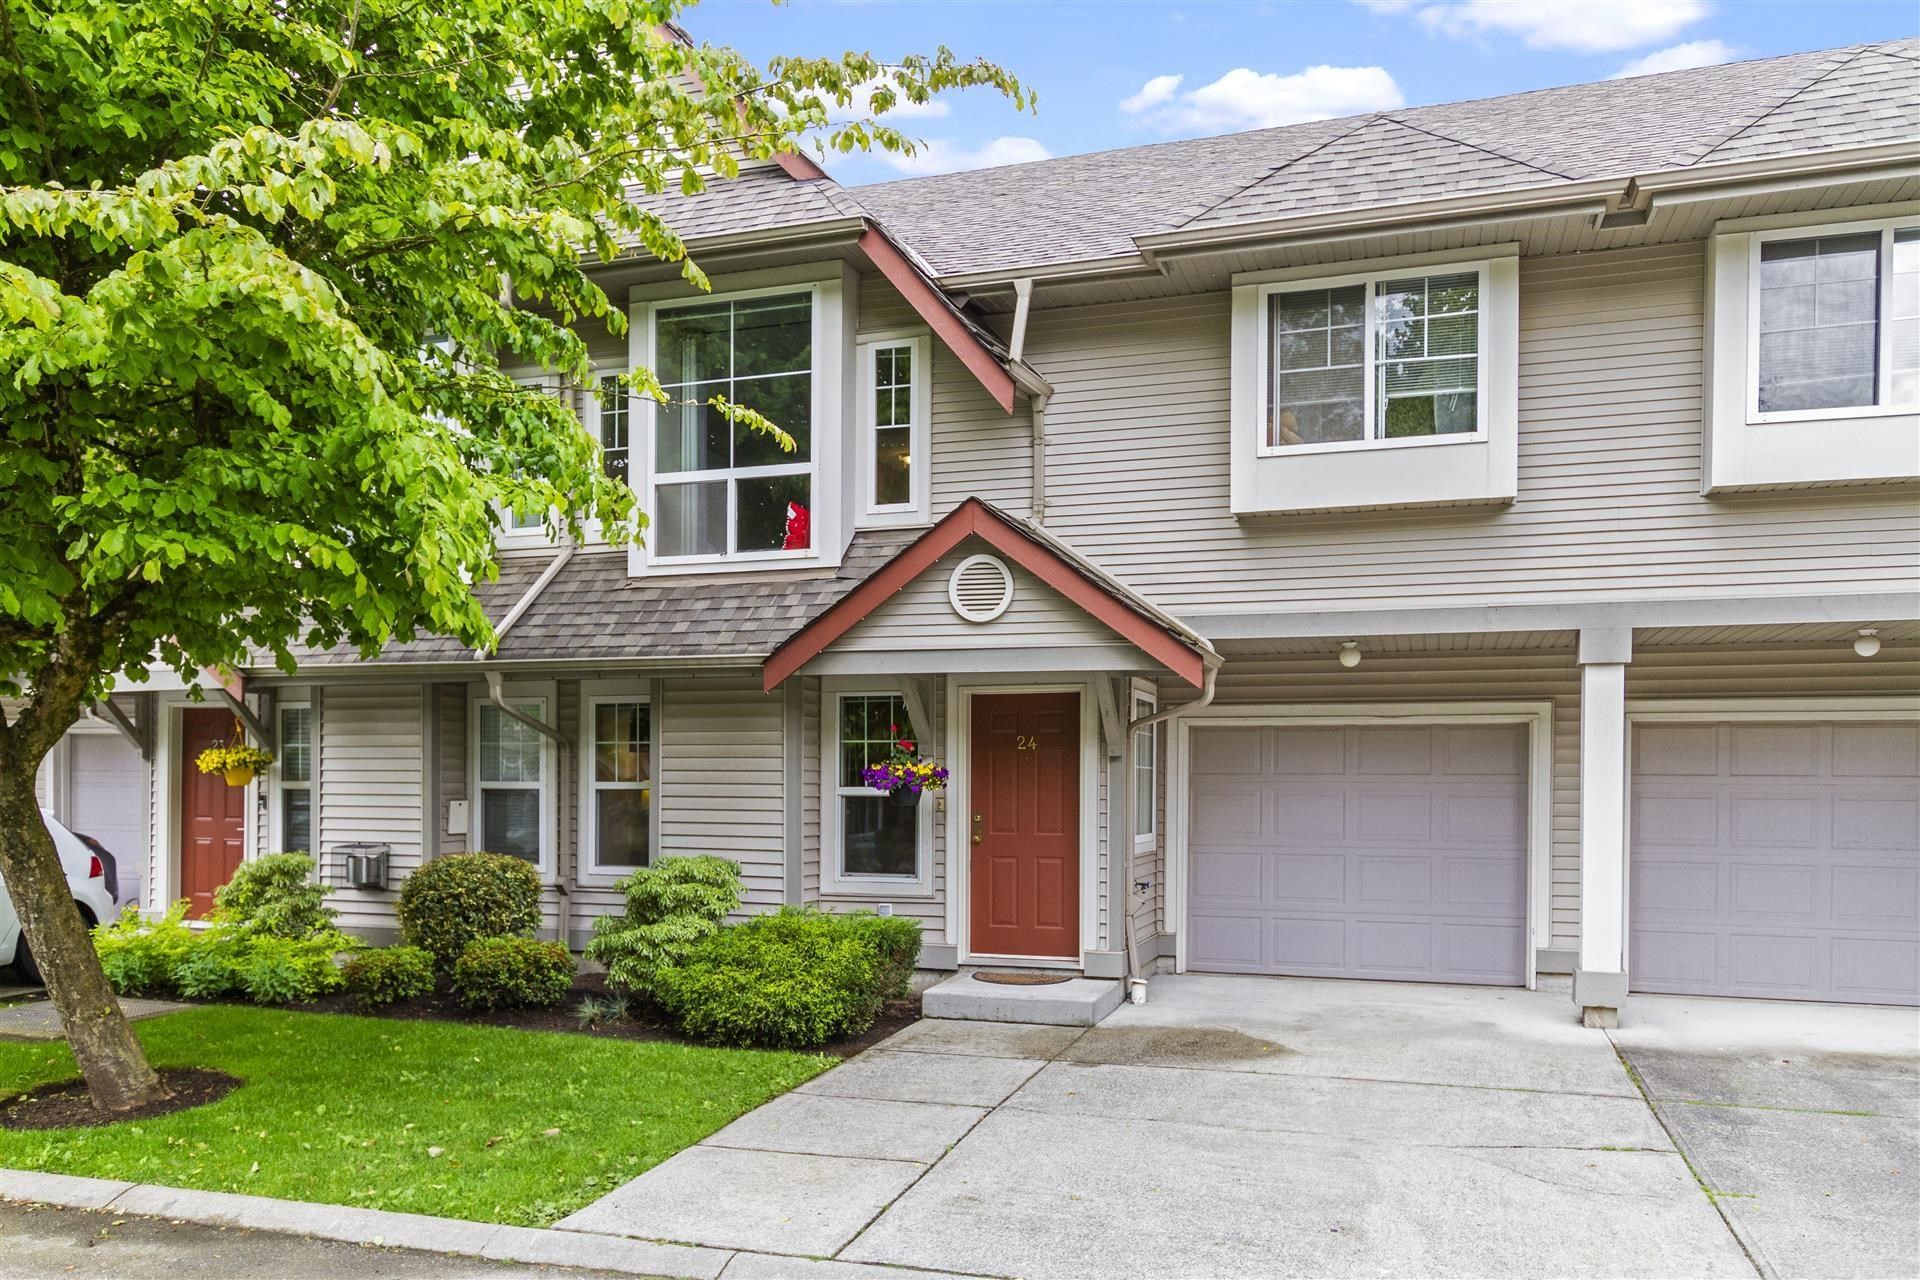 The Thornton Group has just listed ANOTHER home in East Central, Maple Ridge